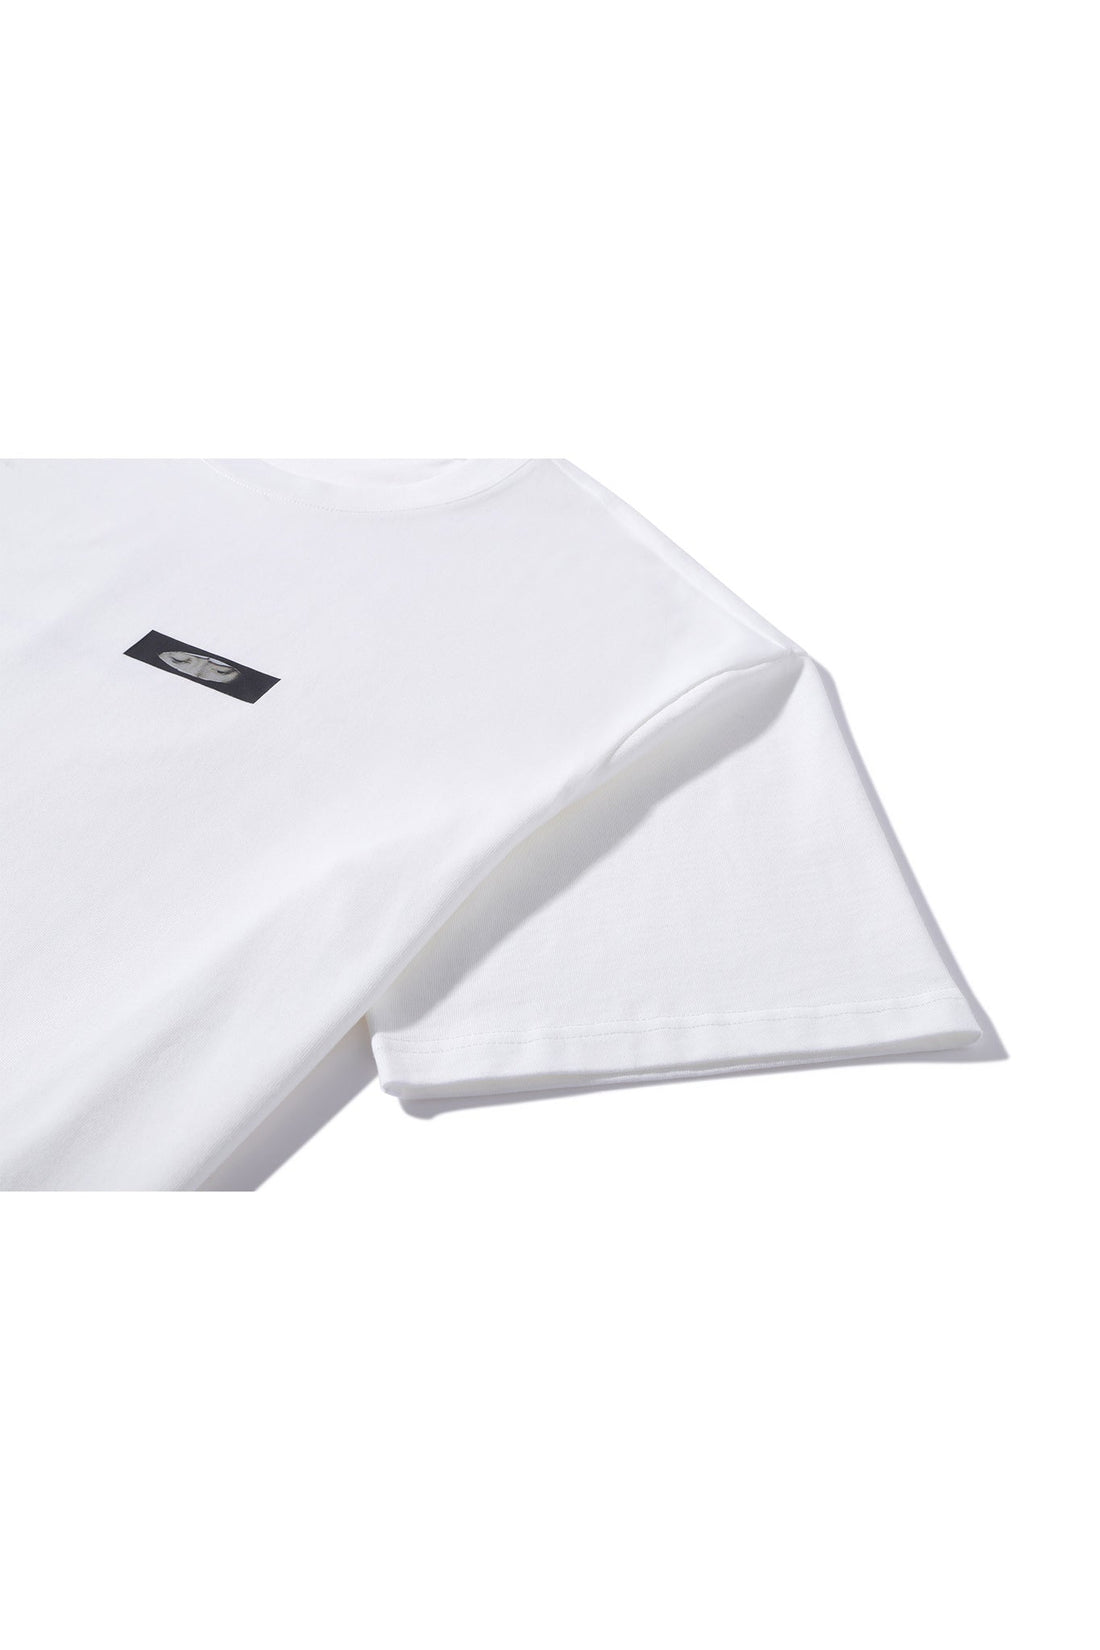 SILENCE TSHIRT WHITE Acupuncture